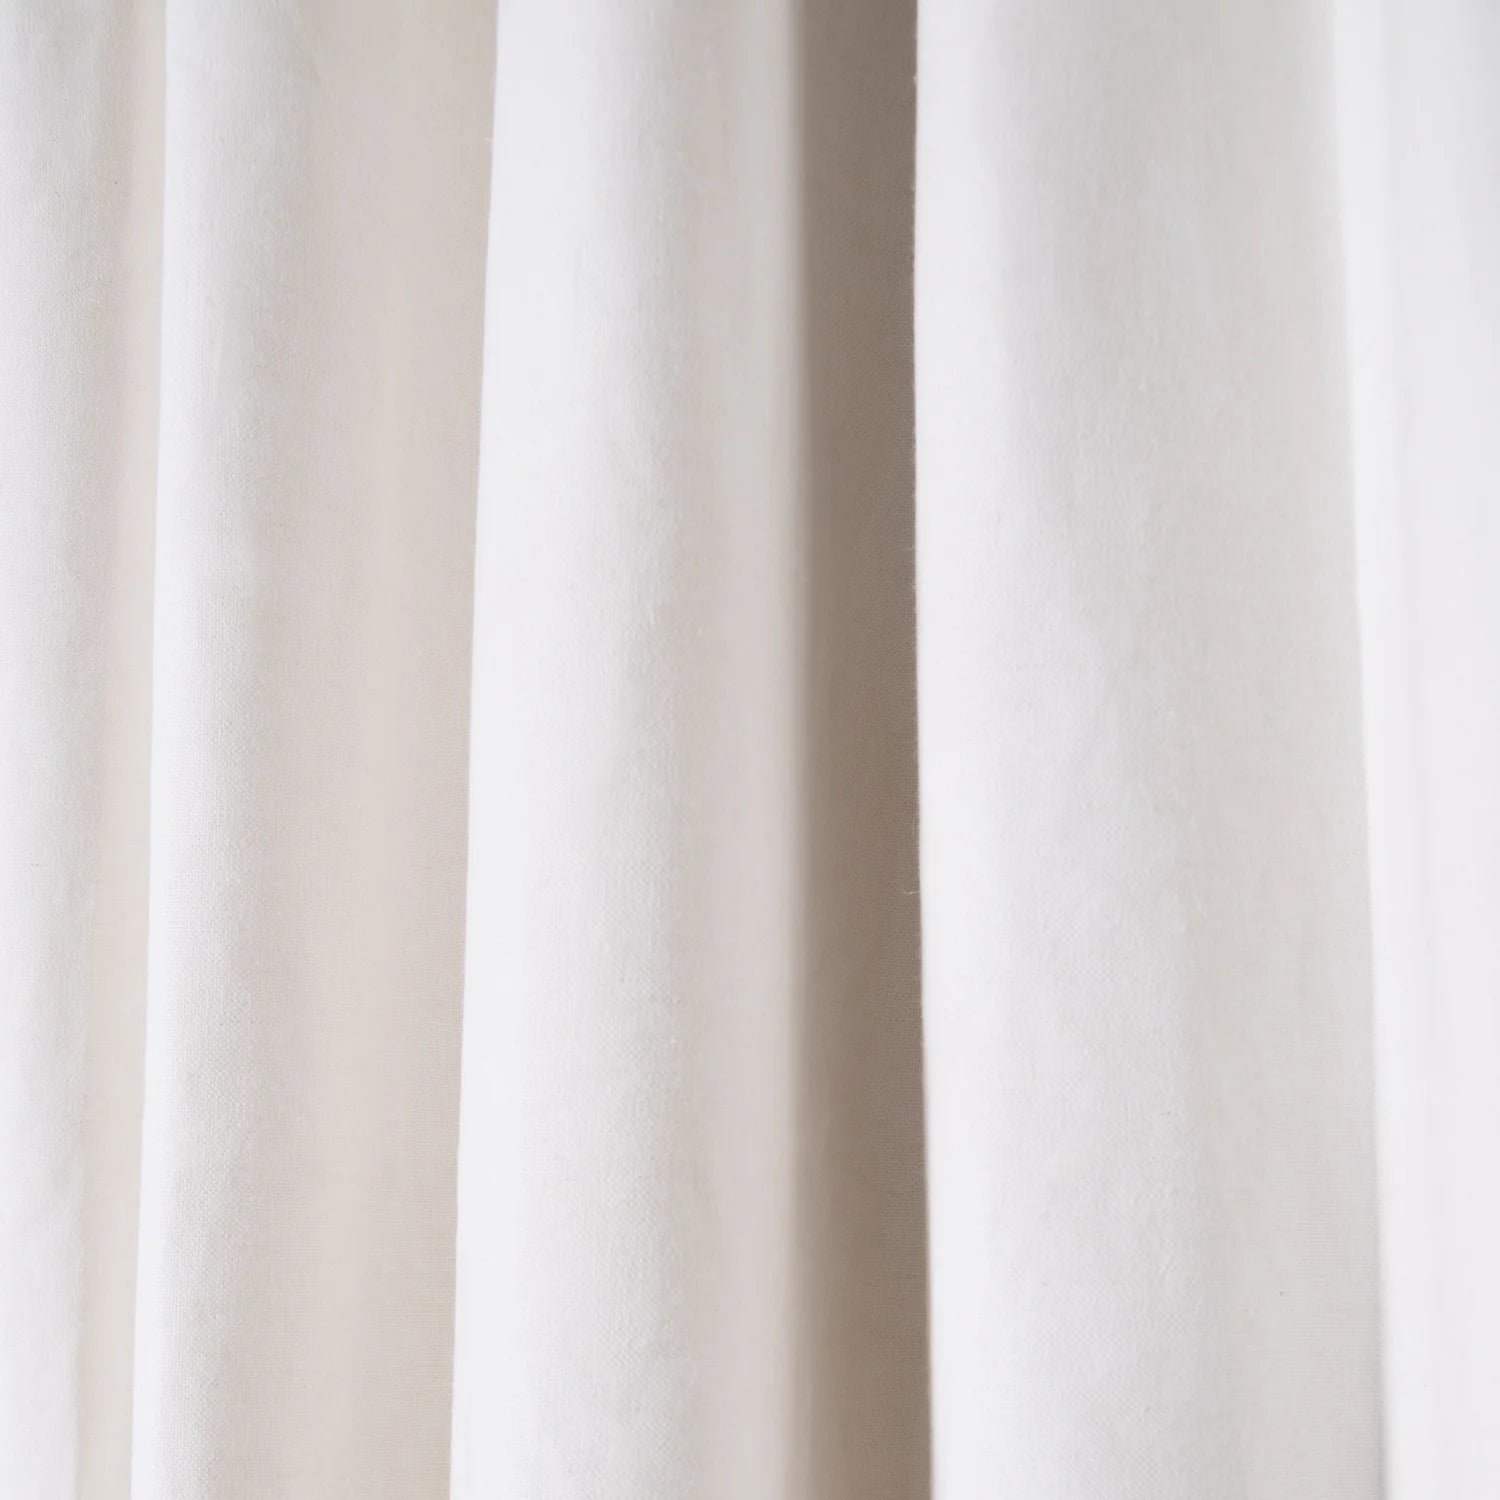 Flour Curtain - Tailored Pleat 50"W x 99"L, Privacy Lining, Sky Velvet Band on the right side